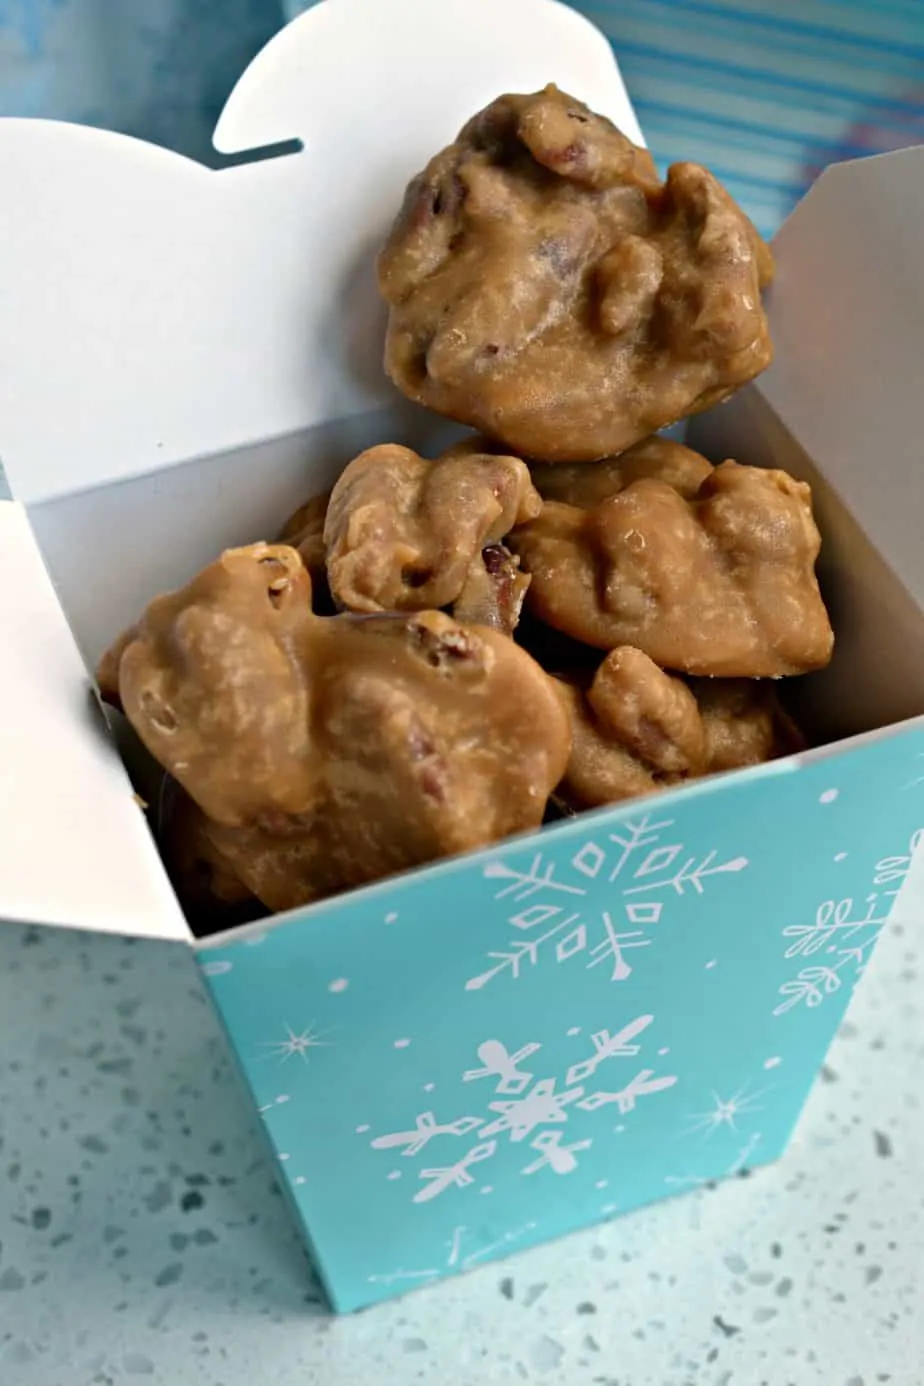 Southern Pecan Pralines are kind of a cross between a candy and a cookie with almost a fudge like texture.